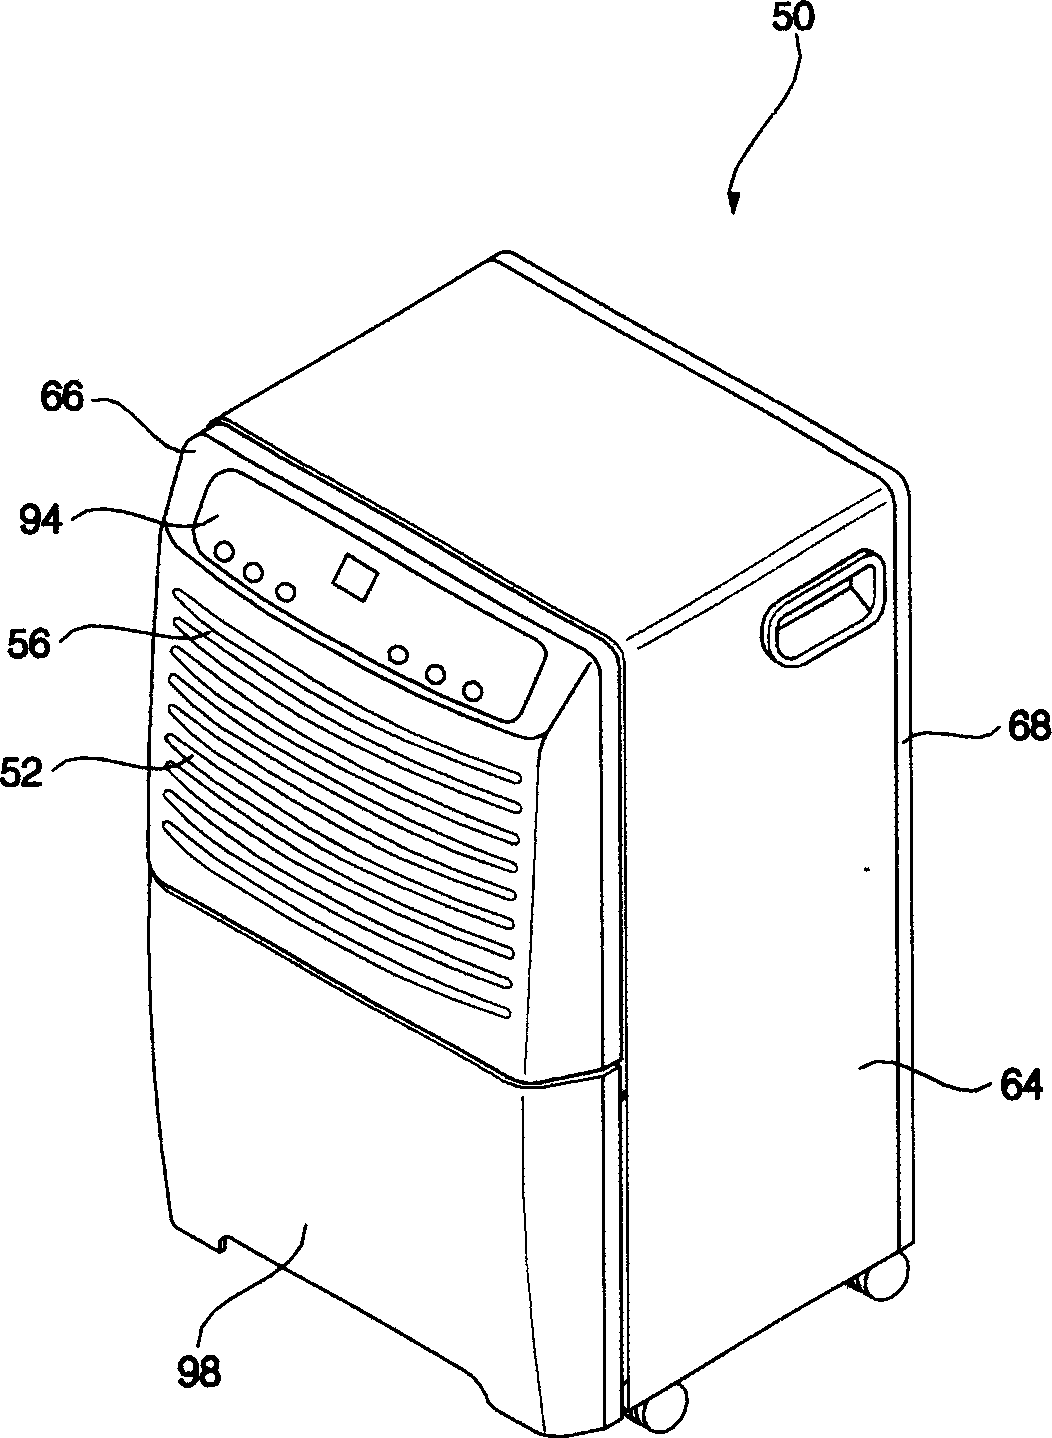 Drainage structure of dehumidifier